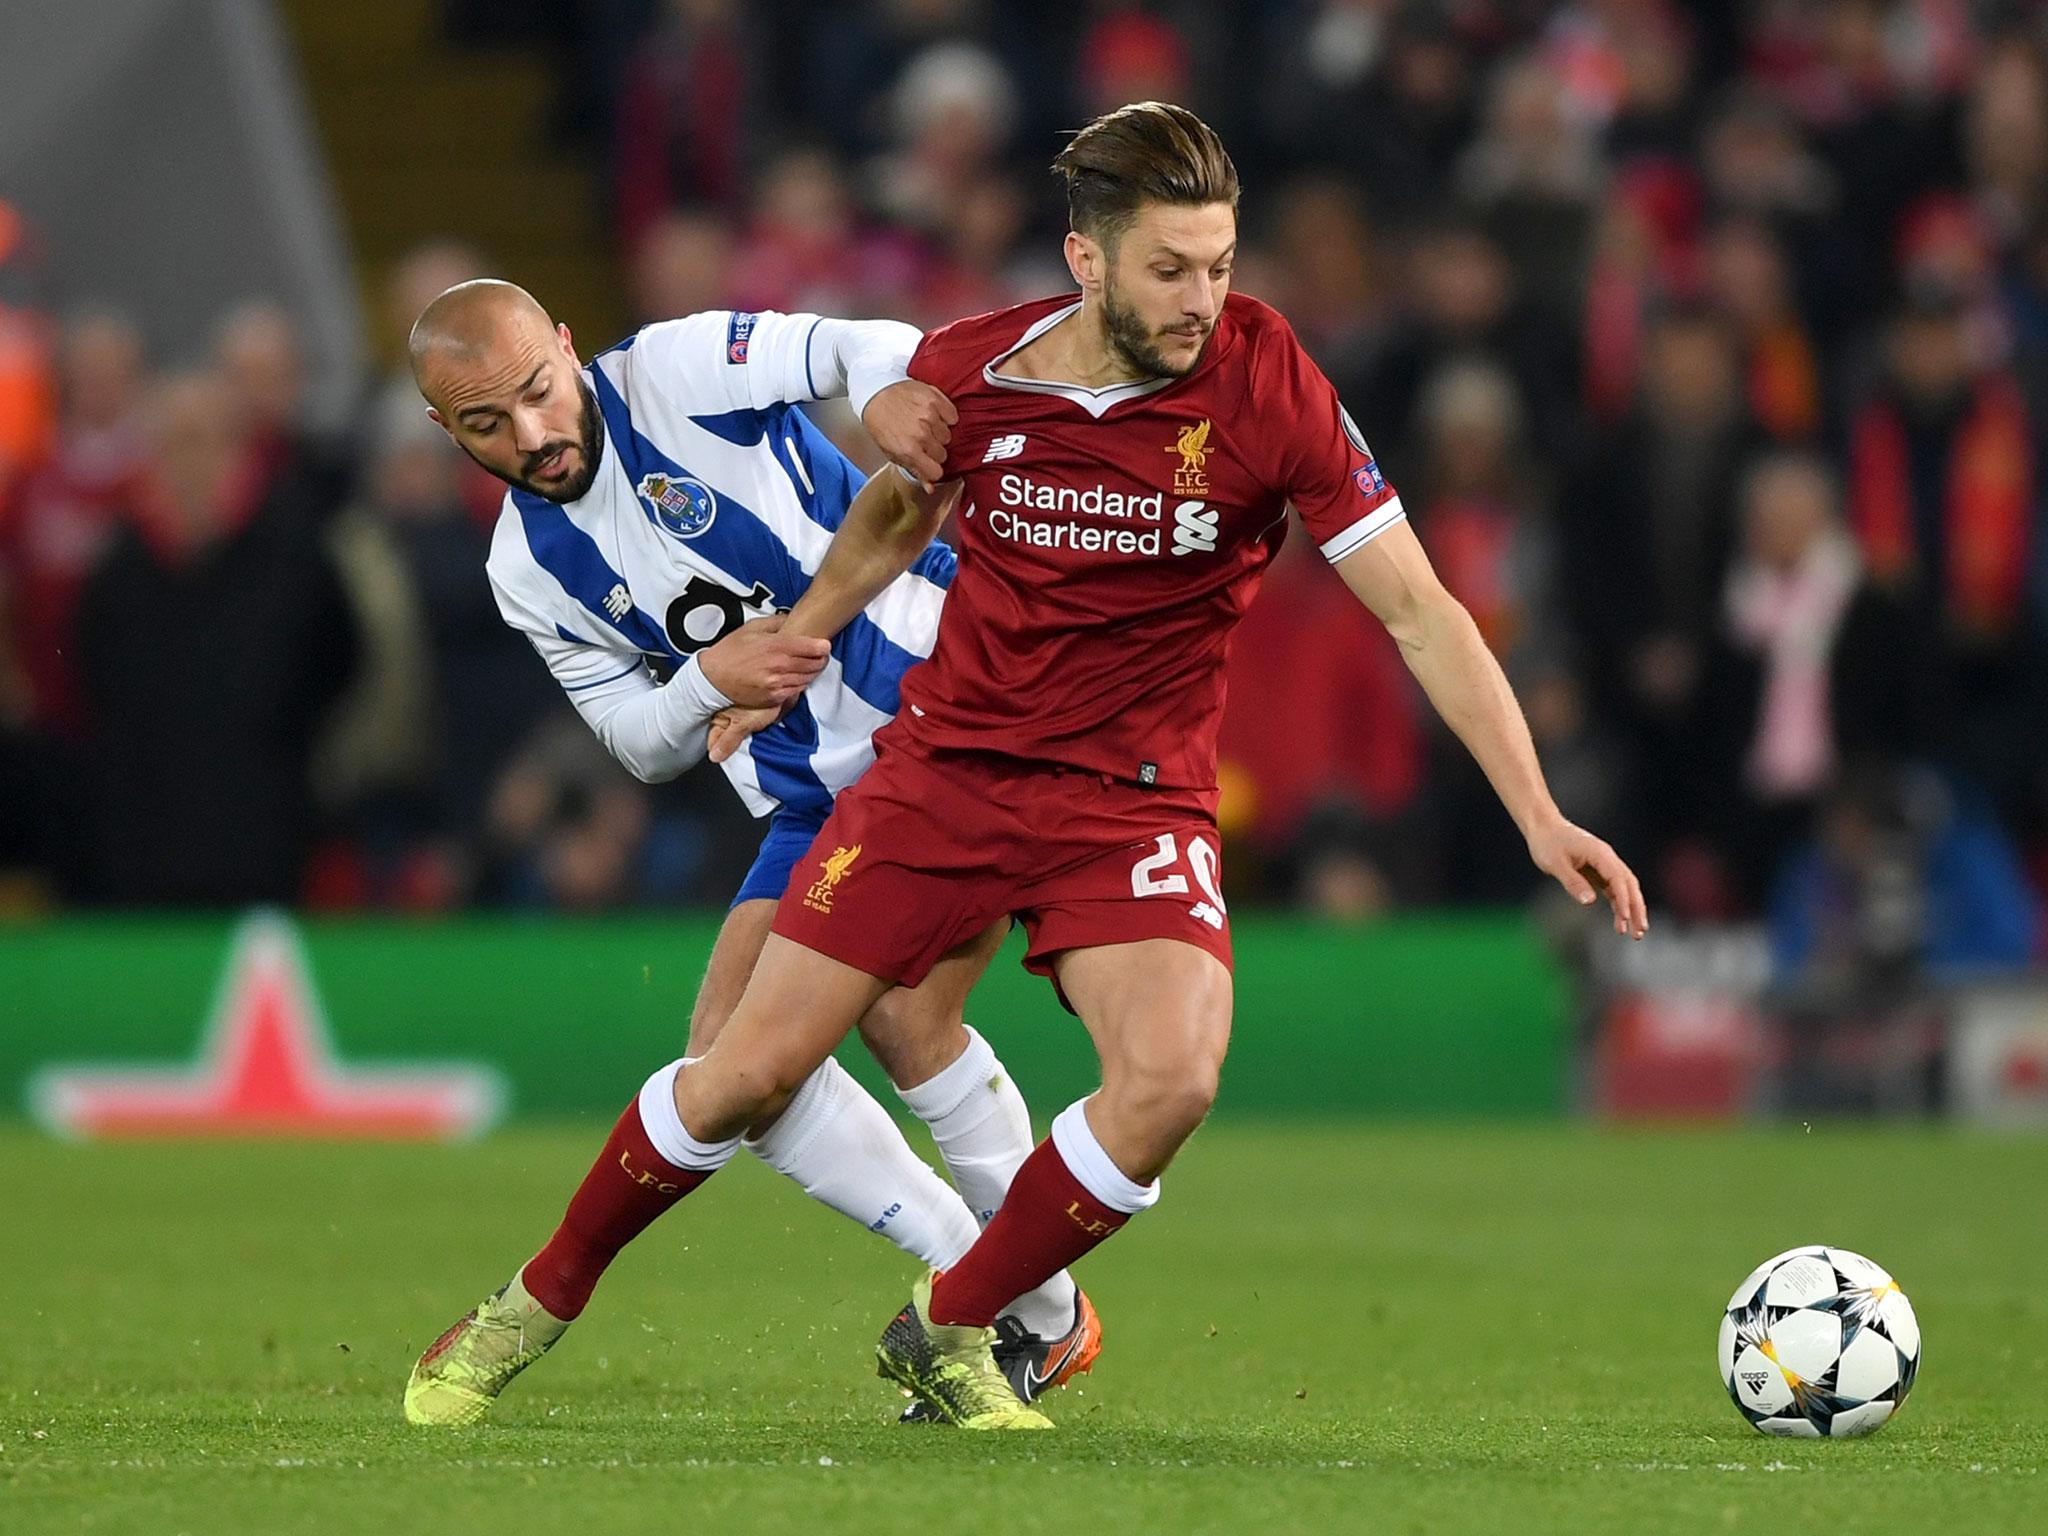 Adam Lallana showed what he can add to Liverpool’s attack